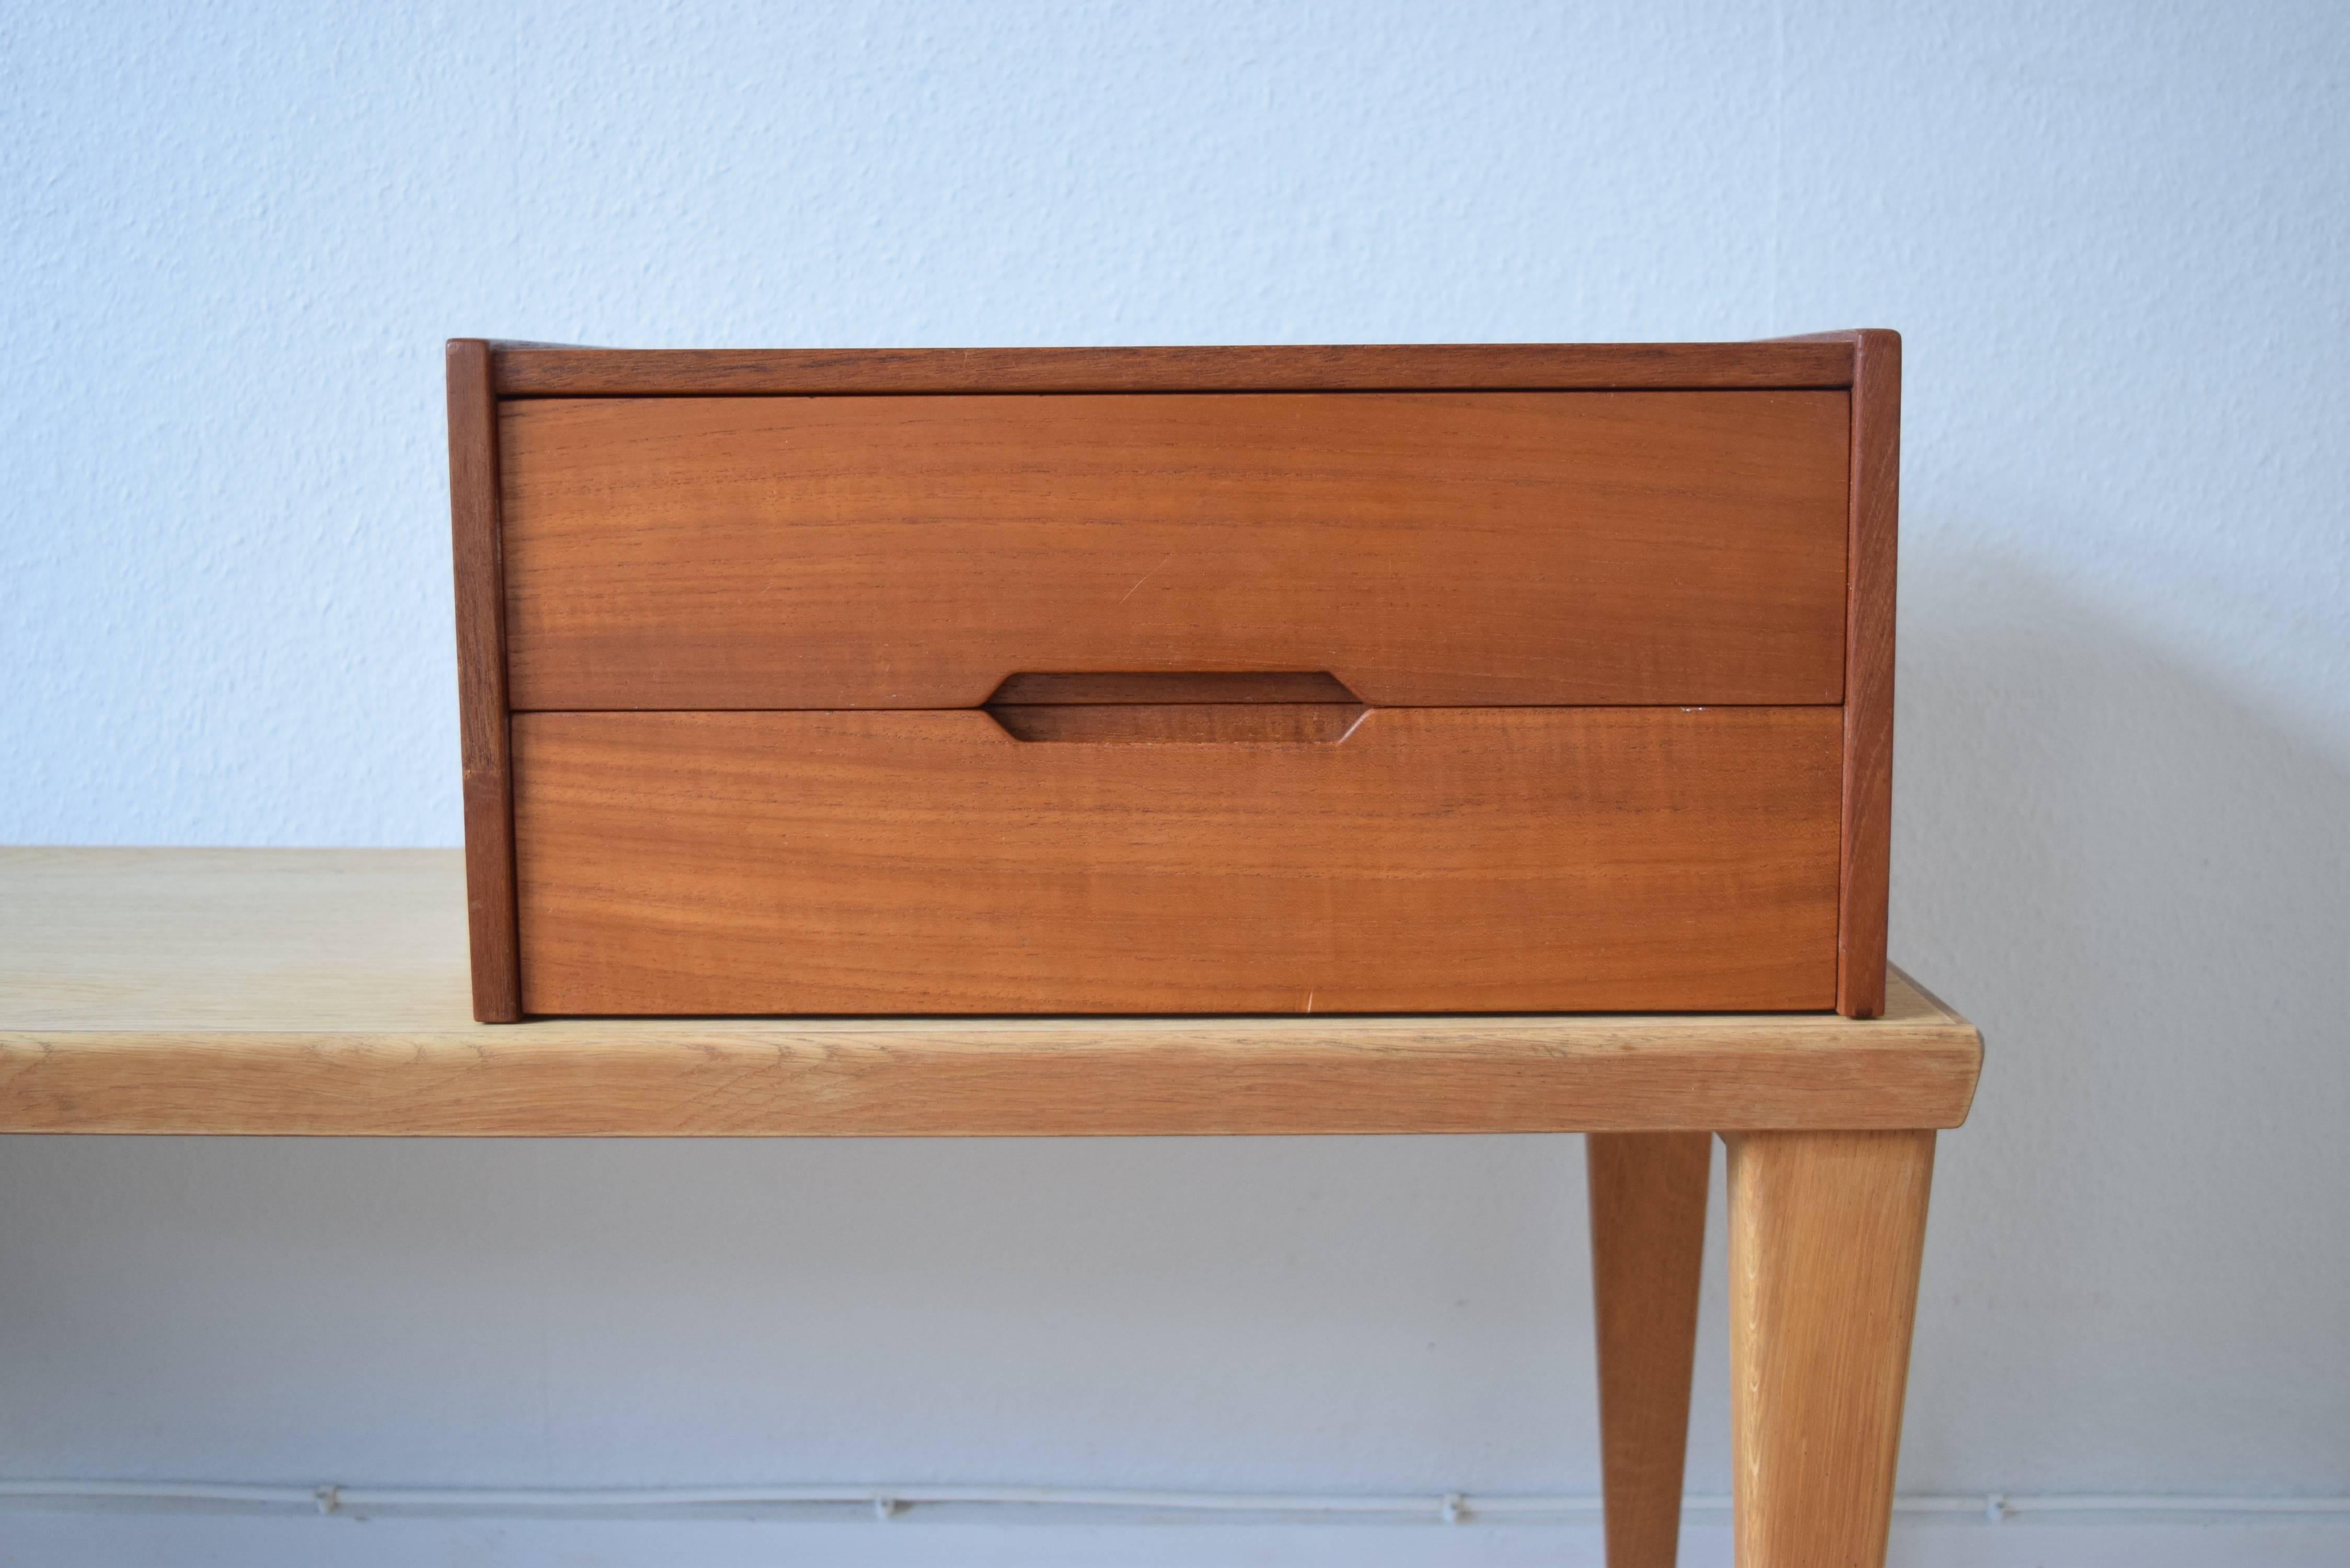 Entry set designed by Kai Kristiansen for Aksel Kjersgaard, Denmark in the 1960s. Entry set of oak bench, teak drawers and mirror. This set has been restored and is a fine example of Scandinavian craftsmanship and design. The drawers can sit on